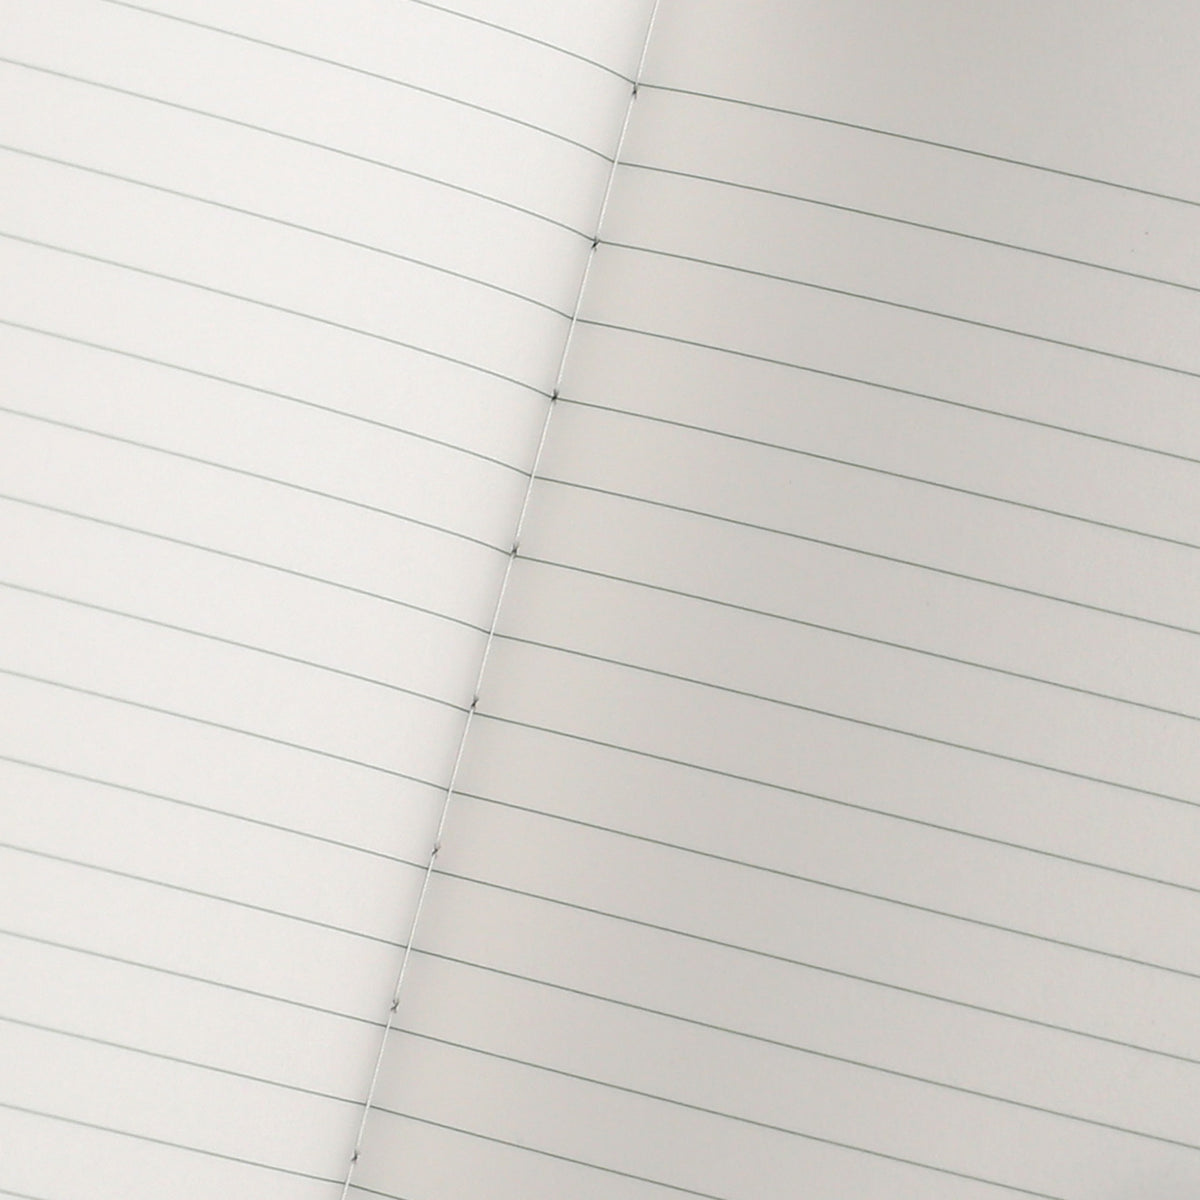 detail of an open notebook showing the gray printed lines and white stitching